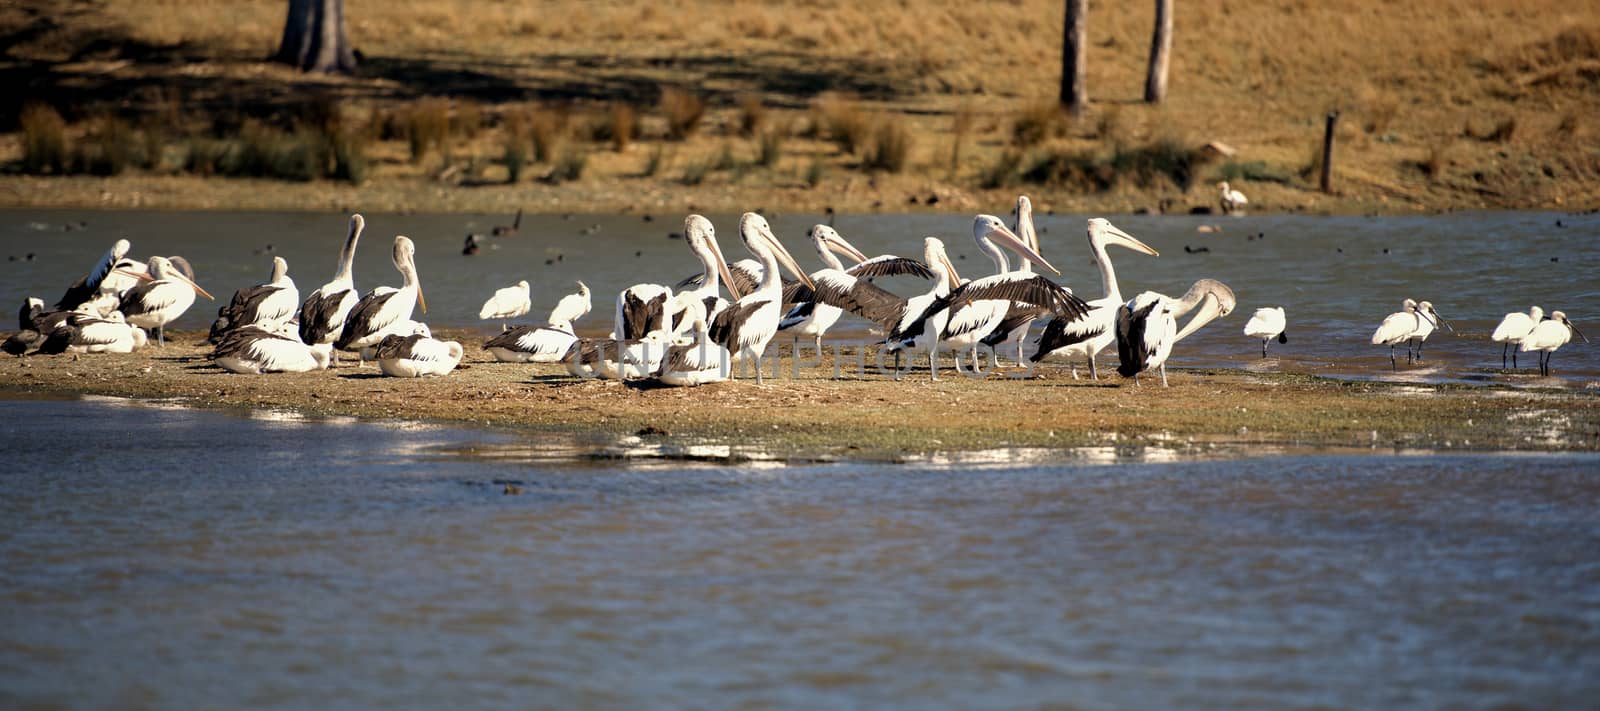 Pelicans resting by the lake together during the day in Queensland.